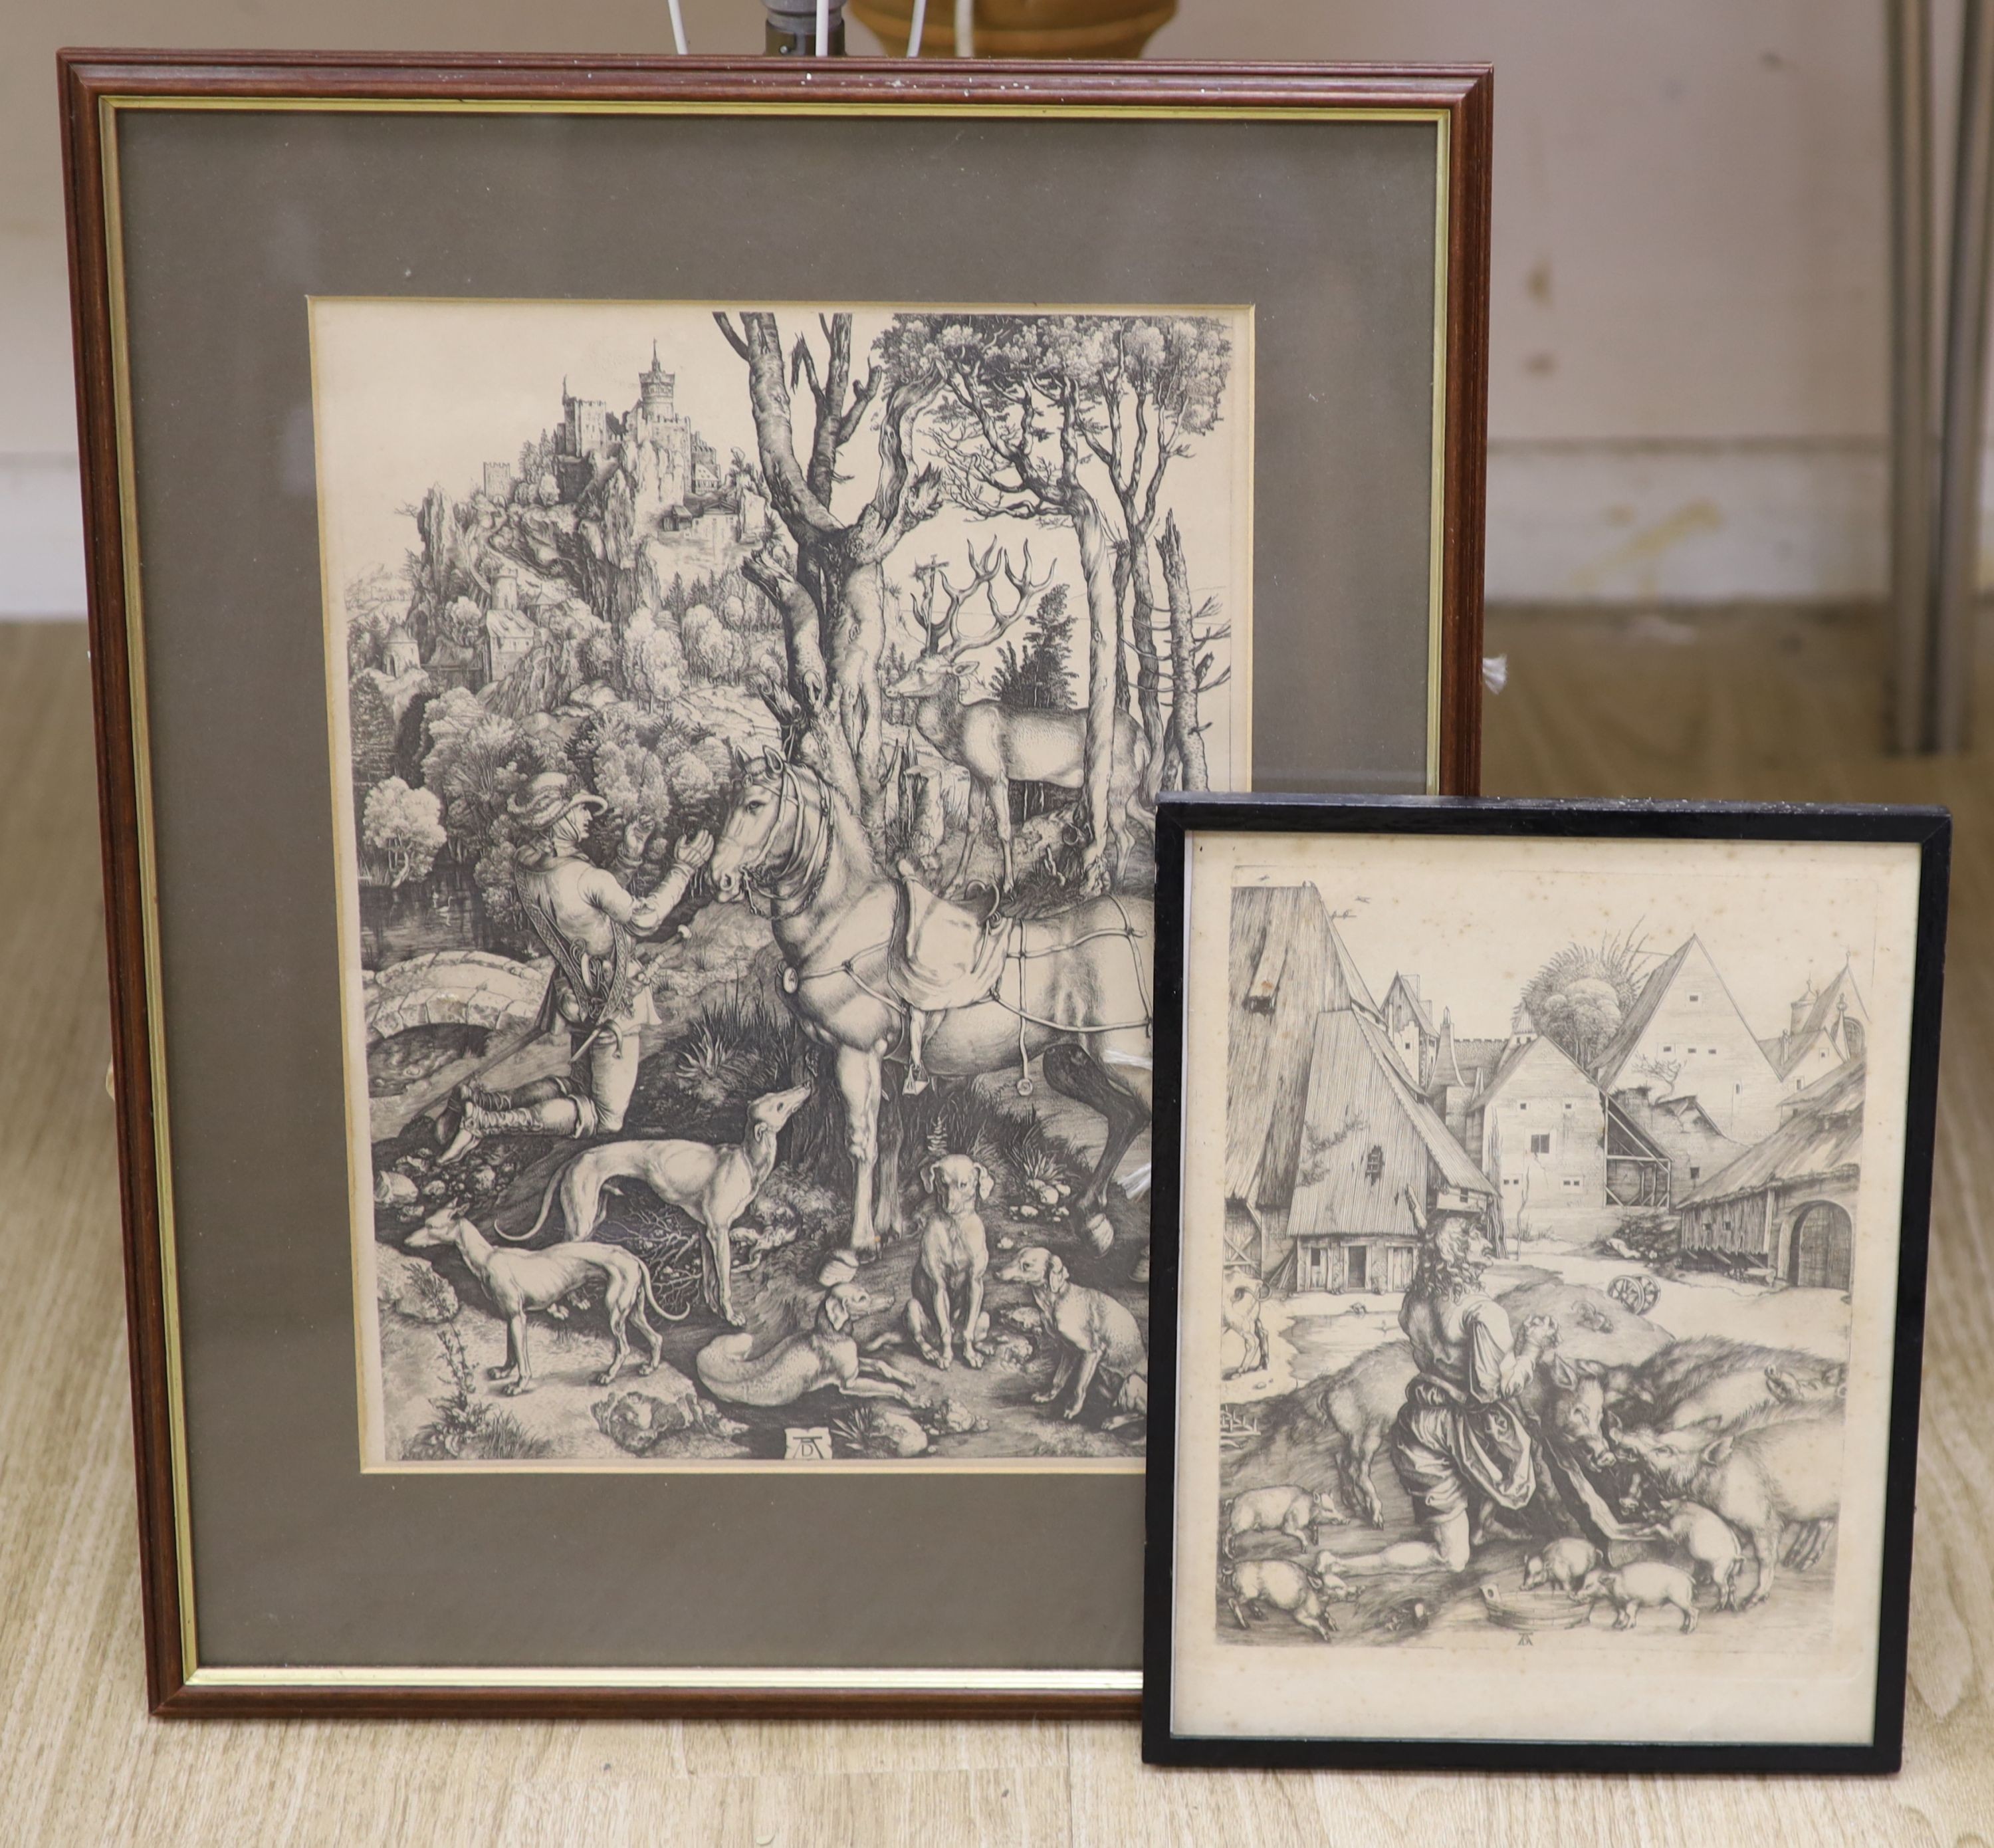 After Albrecht Durer, two photolithographs, 'The Prodigal Son' and 'Saint Eustace', 28 x 22cm and 36 x 27cm